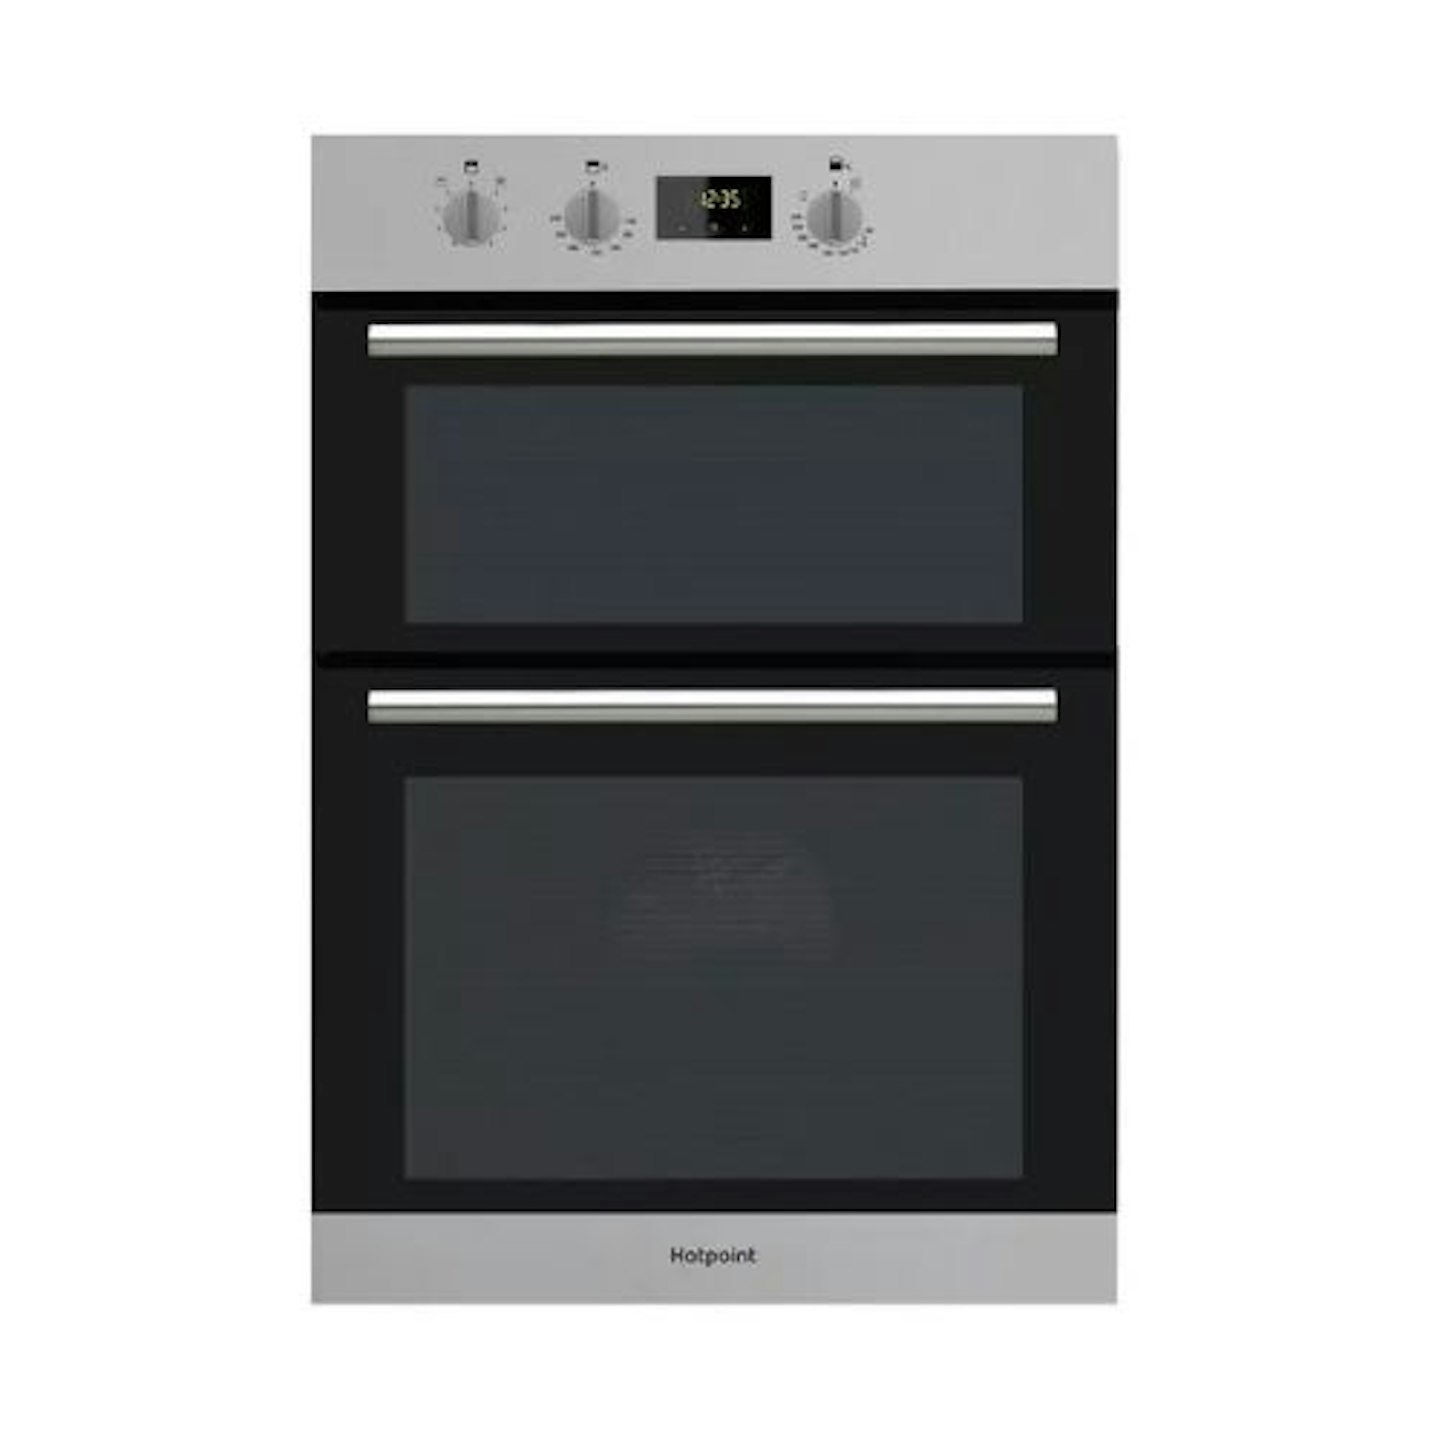 Best Ovens UK - Hotpoint DD2540IX Built-In Double Electric Oven - S/Steel 